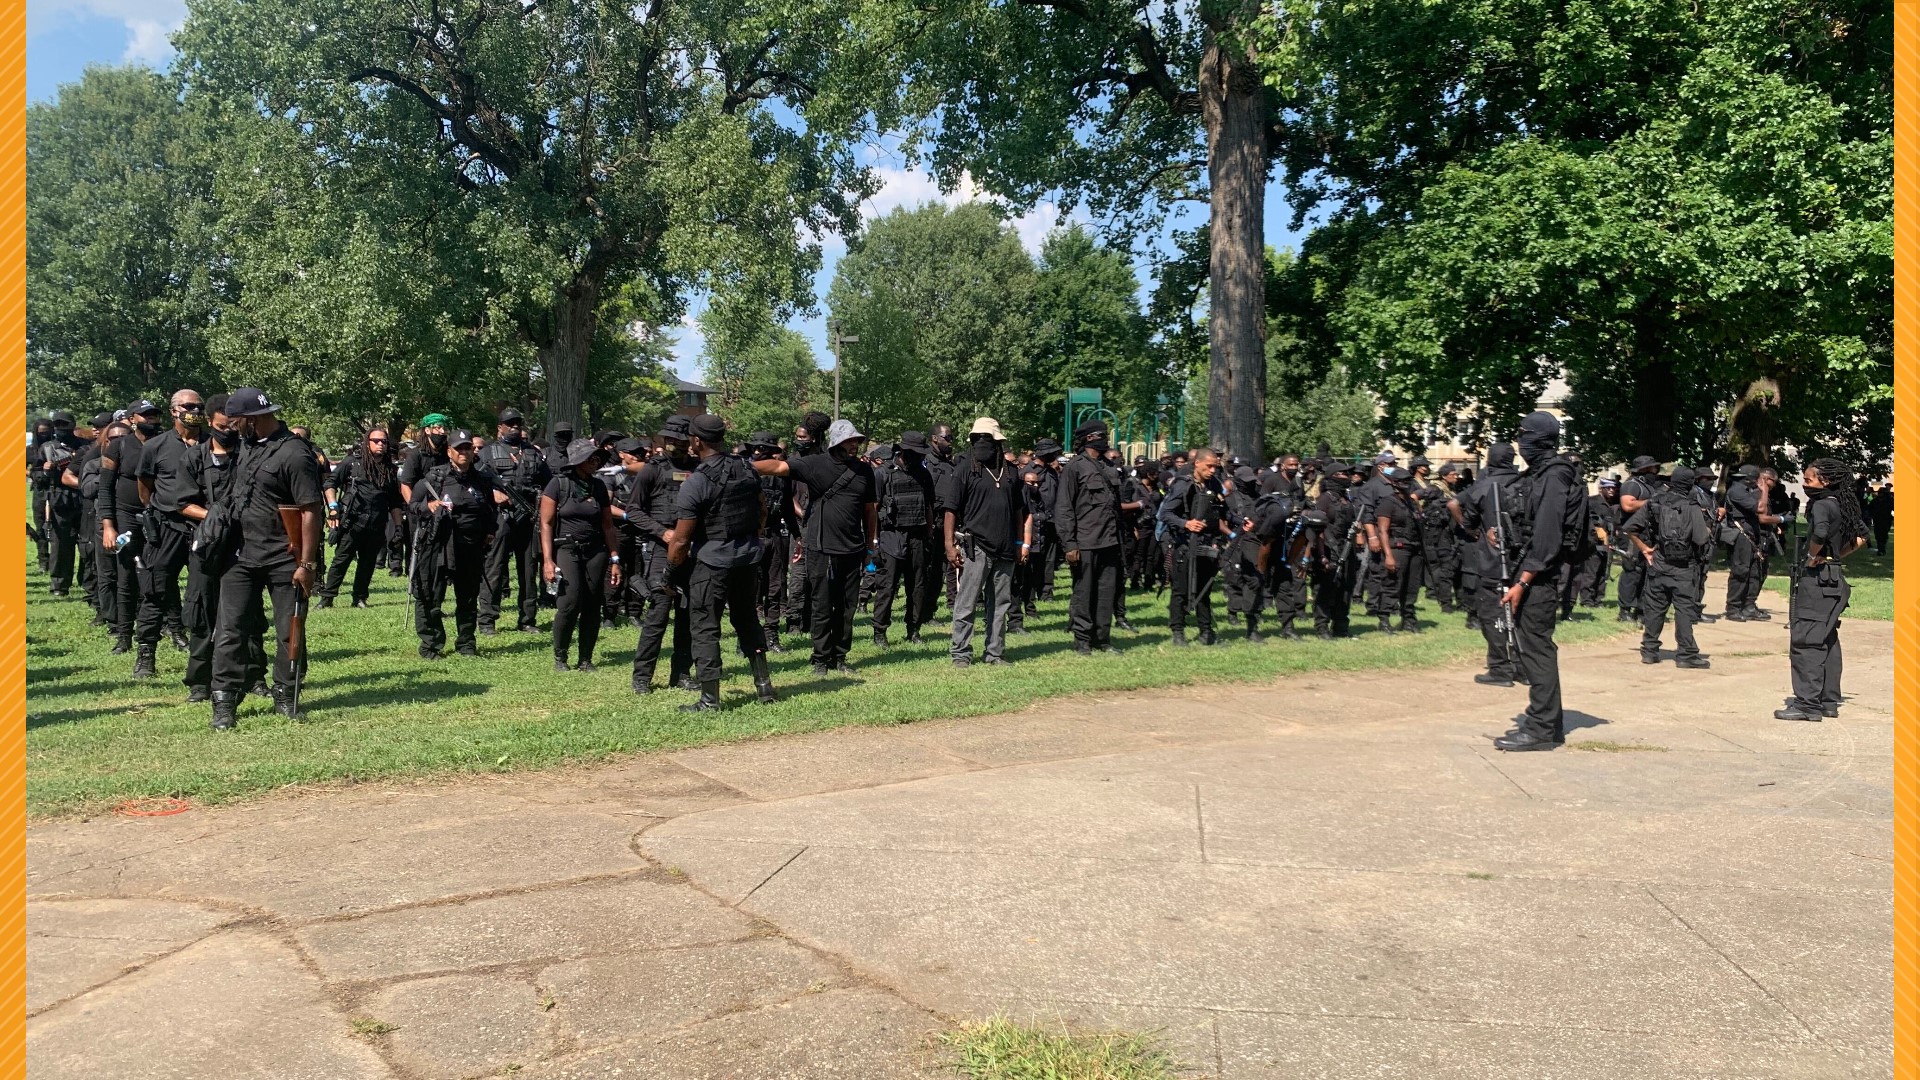 The NFAC, a Black armed militia group marched to the Hall of Justice near Jefferson Square Park in downtown Louisville demanding justice for Breonna Taylor.